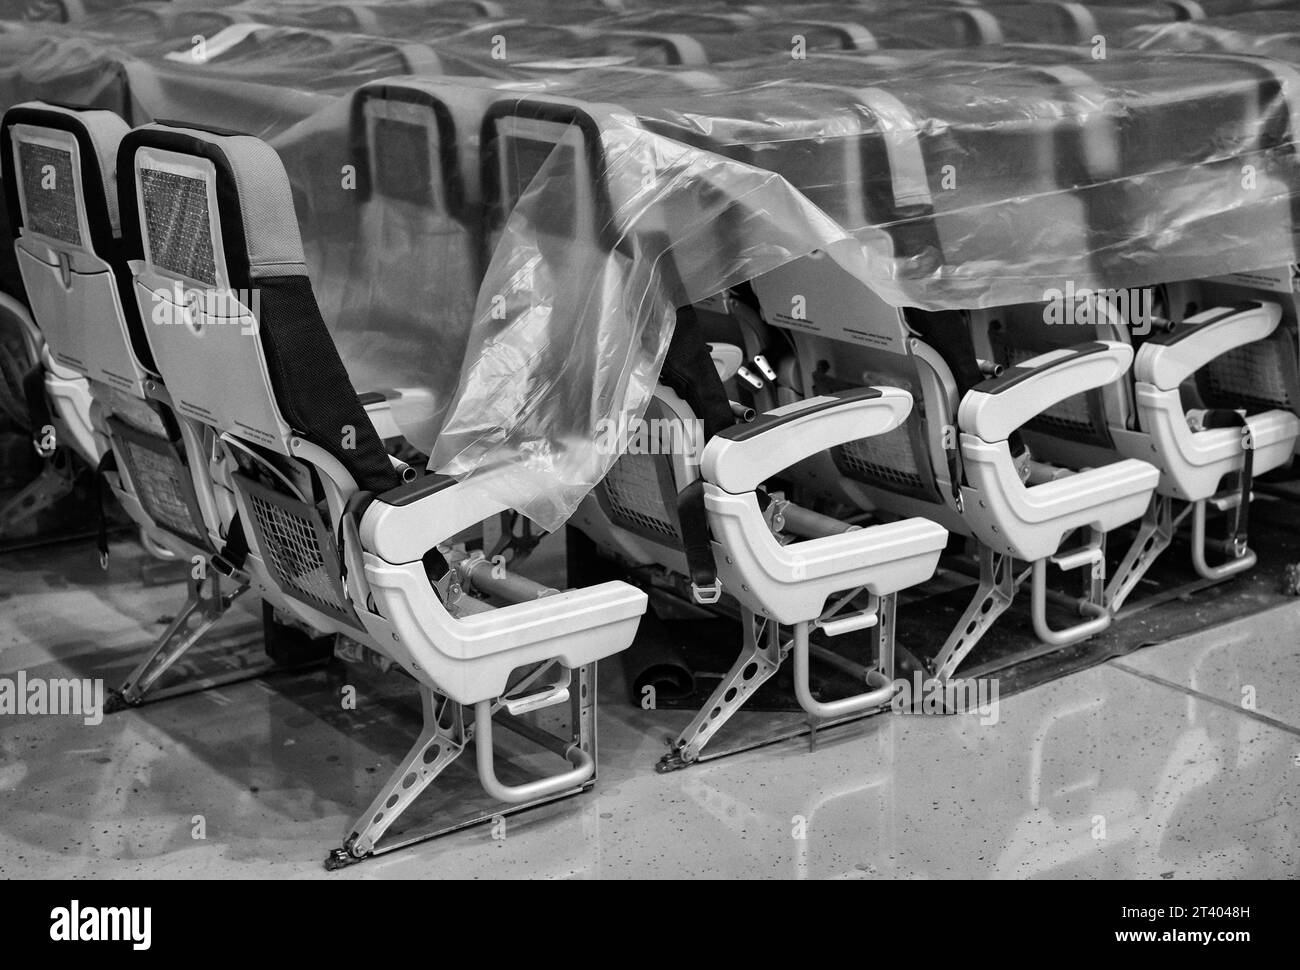 Photo of the disassembled airplane seats in the hangar, covered with protective foil. Black and white photo. Stock Photo